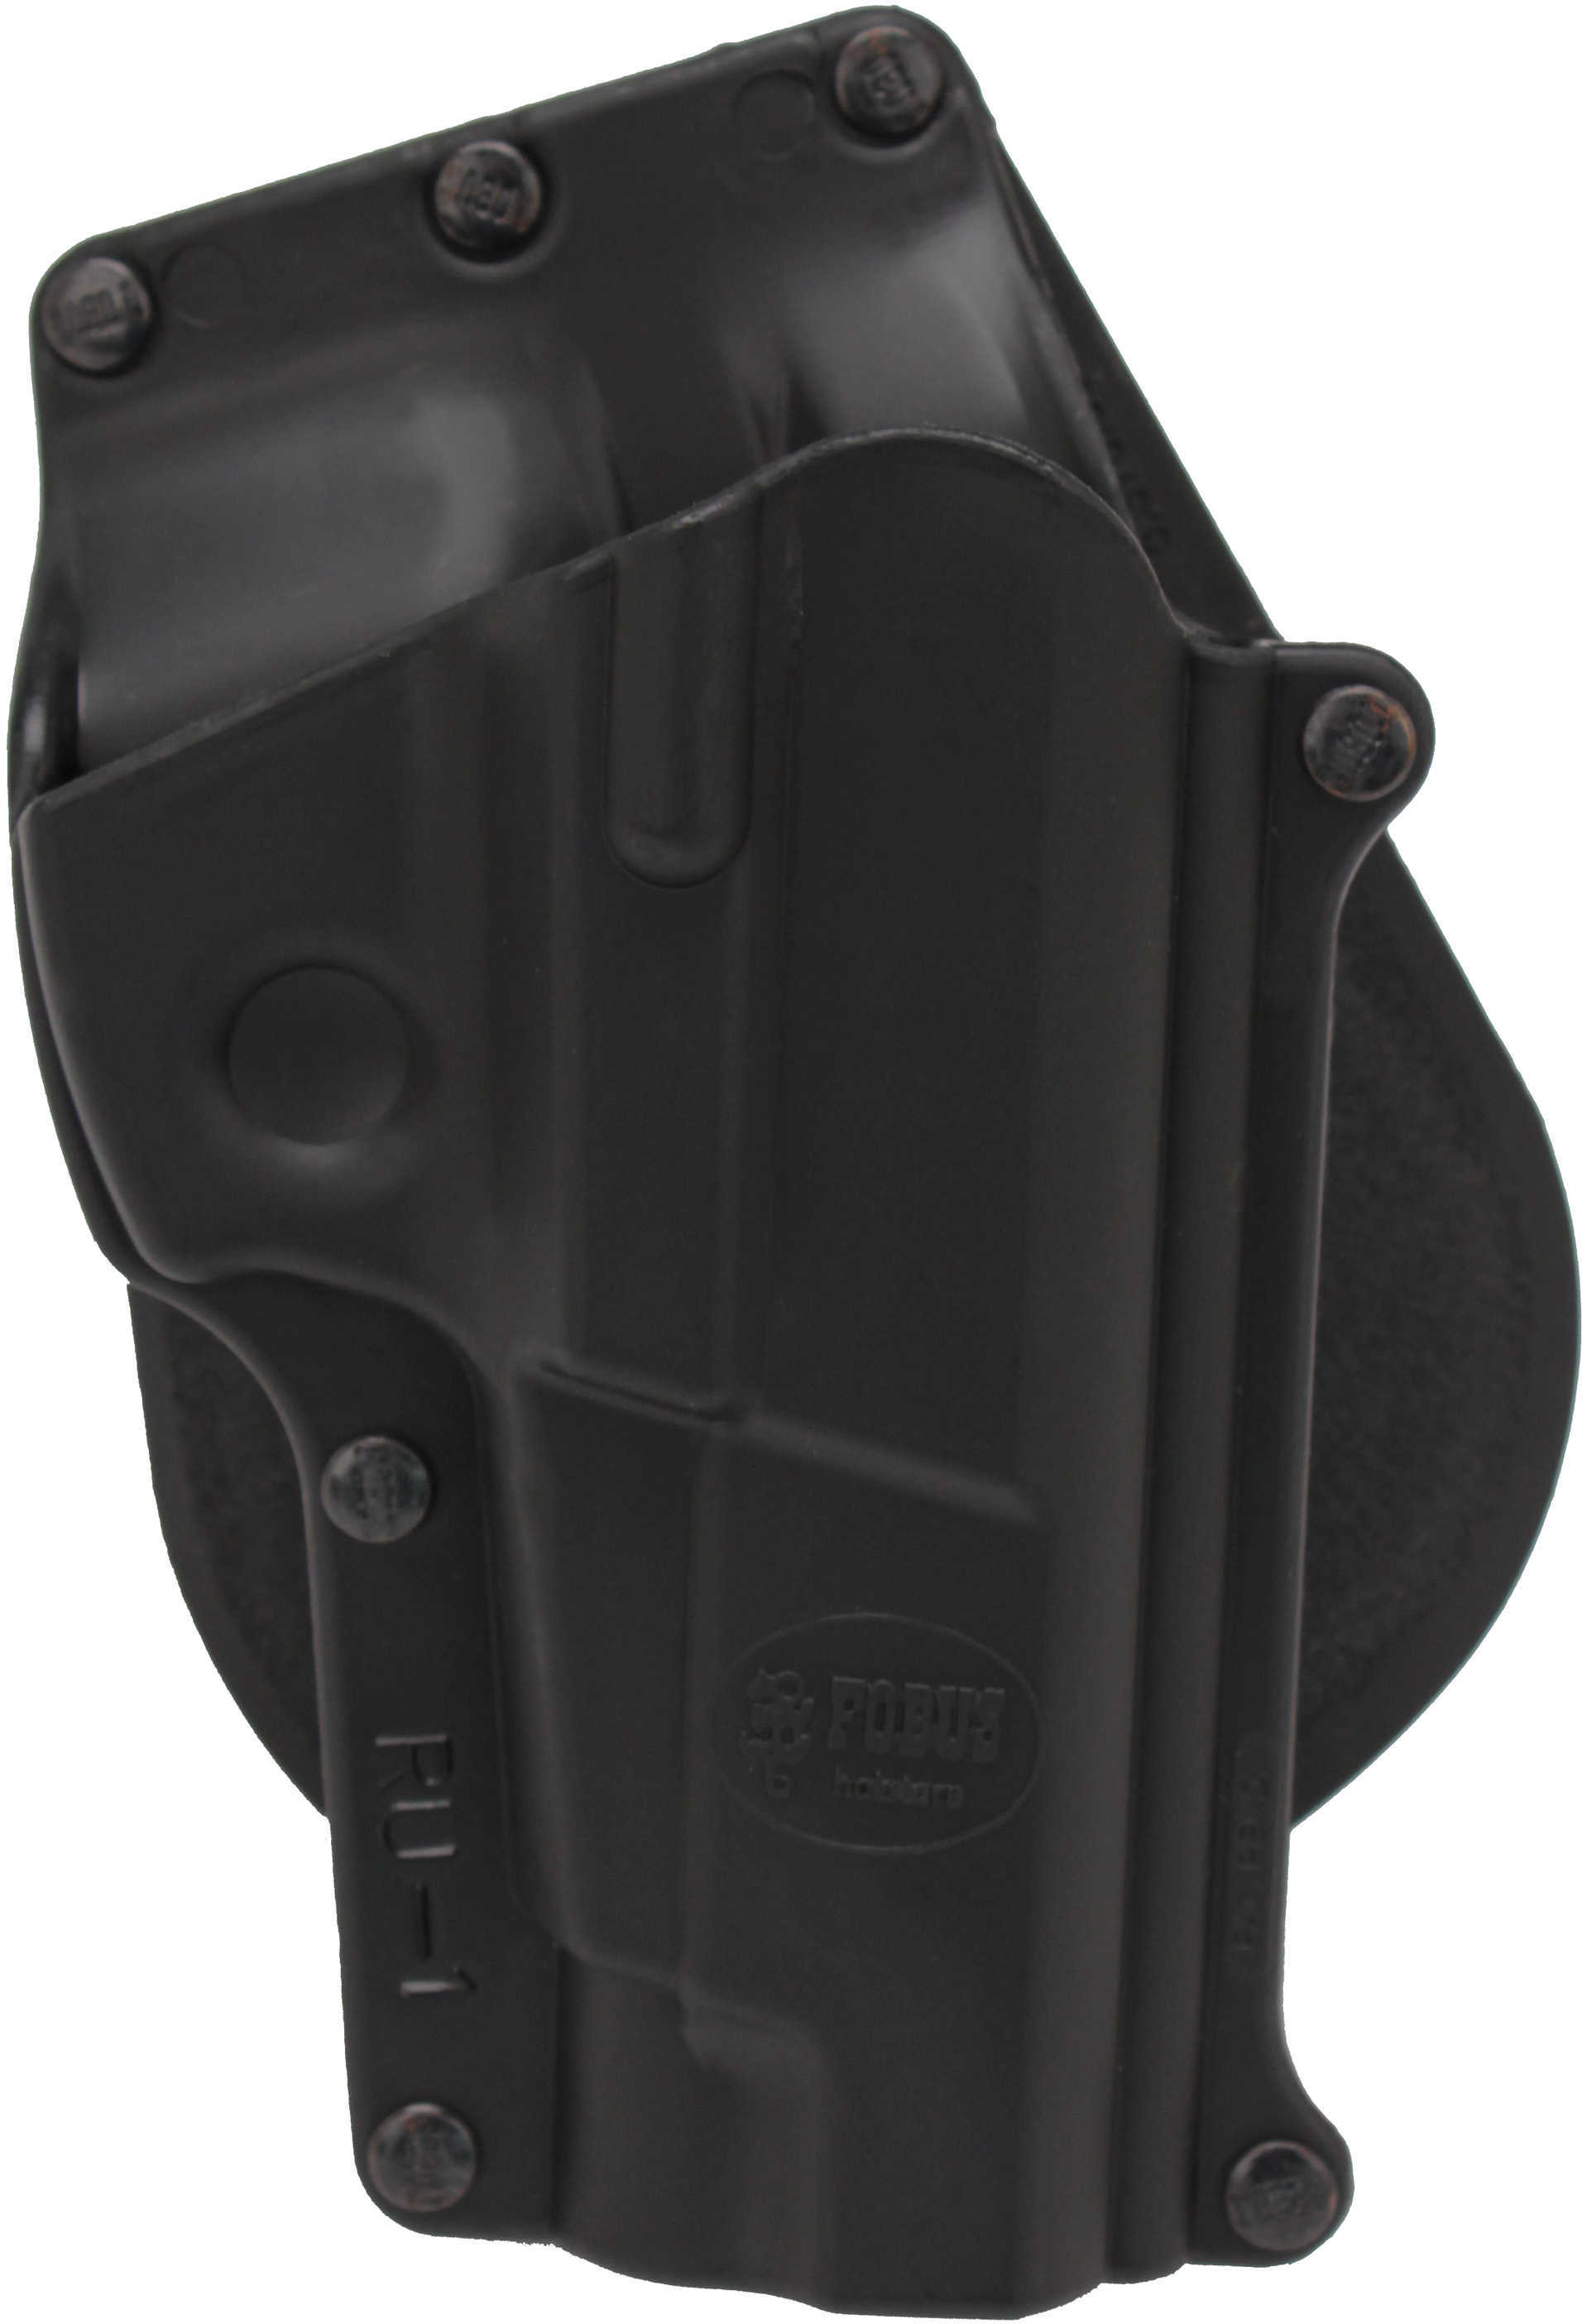 Fobus Paddle Holster Fits Ruger P85/89 Large Auto 9mm/ 40 Cal Right Hand Kydex Black RU1